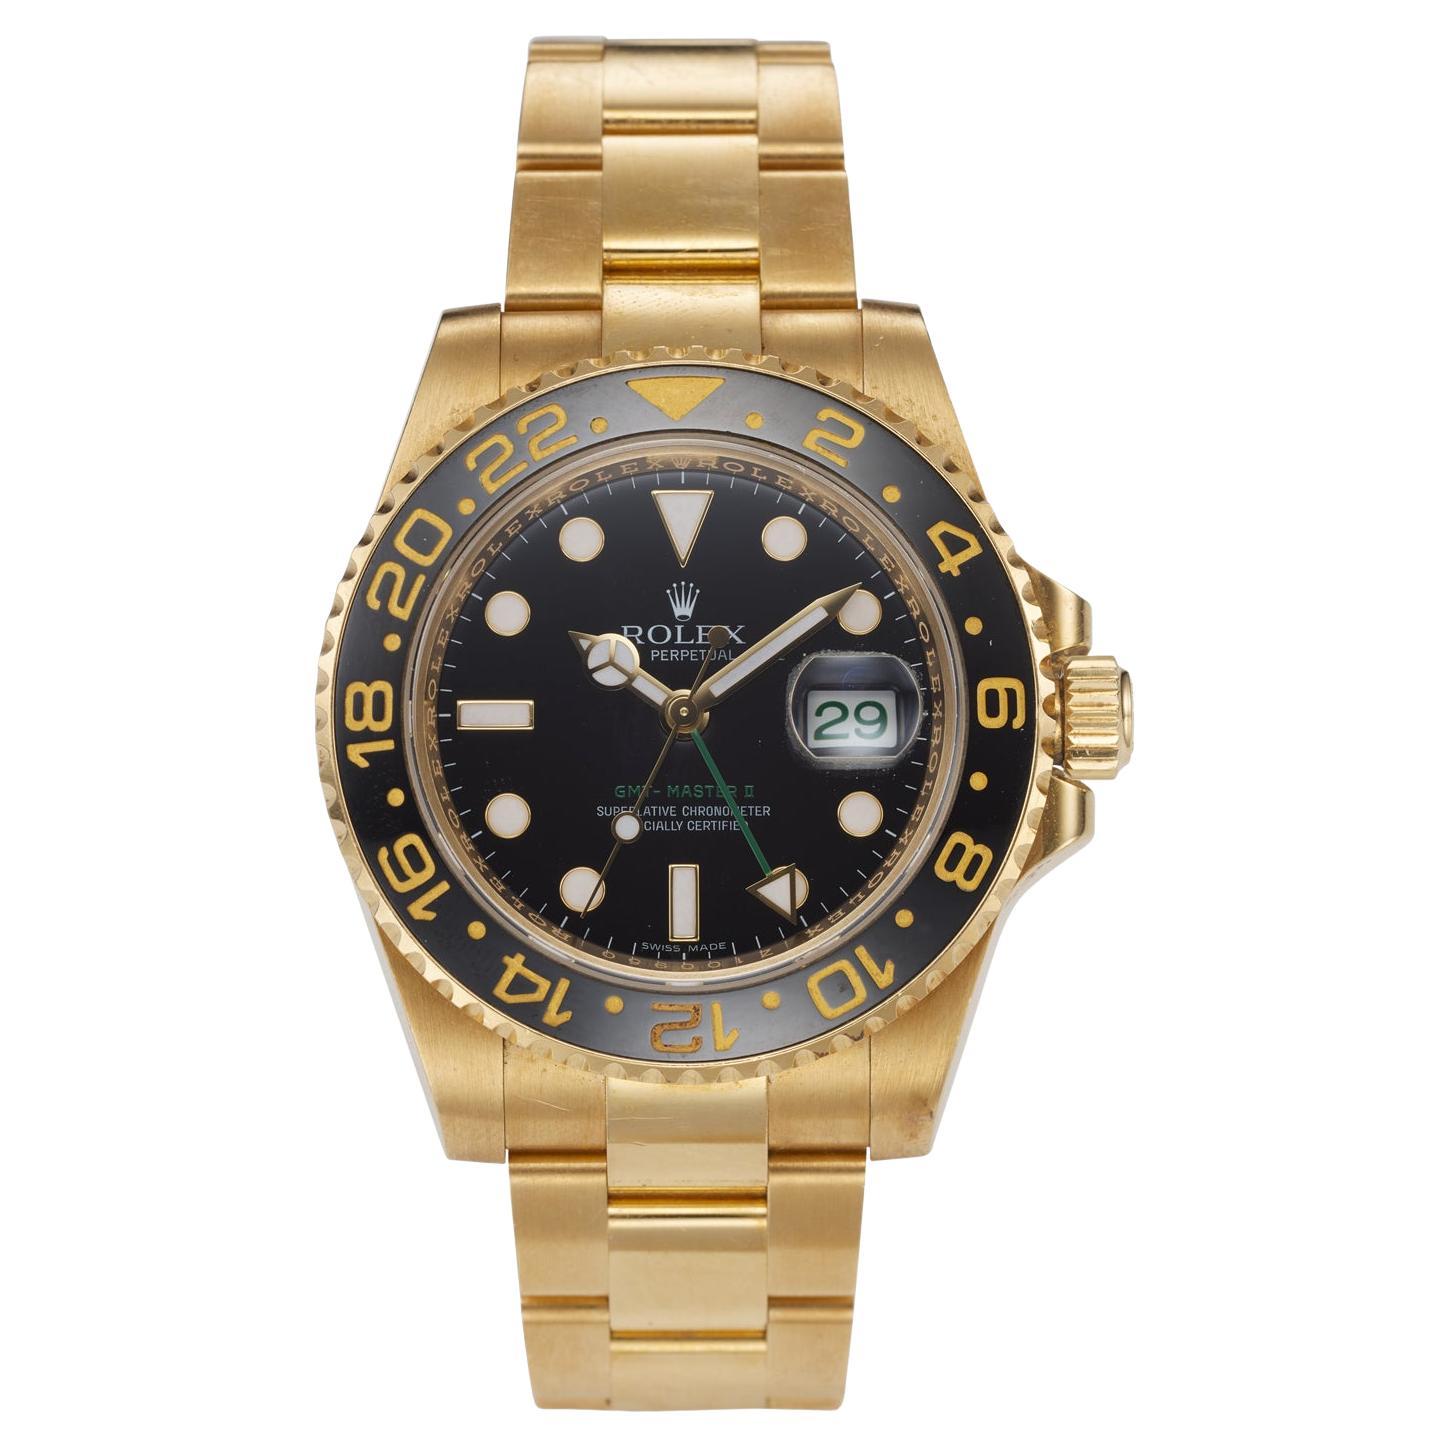 Montre homme Rolex GMT-Master II Oyster Automatic Black en or jaune 18 carats 116718